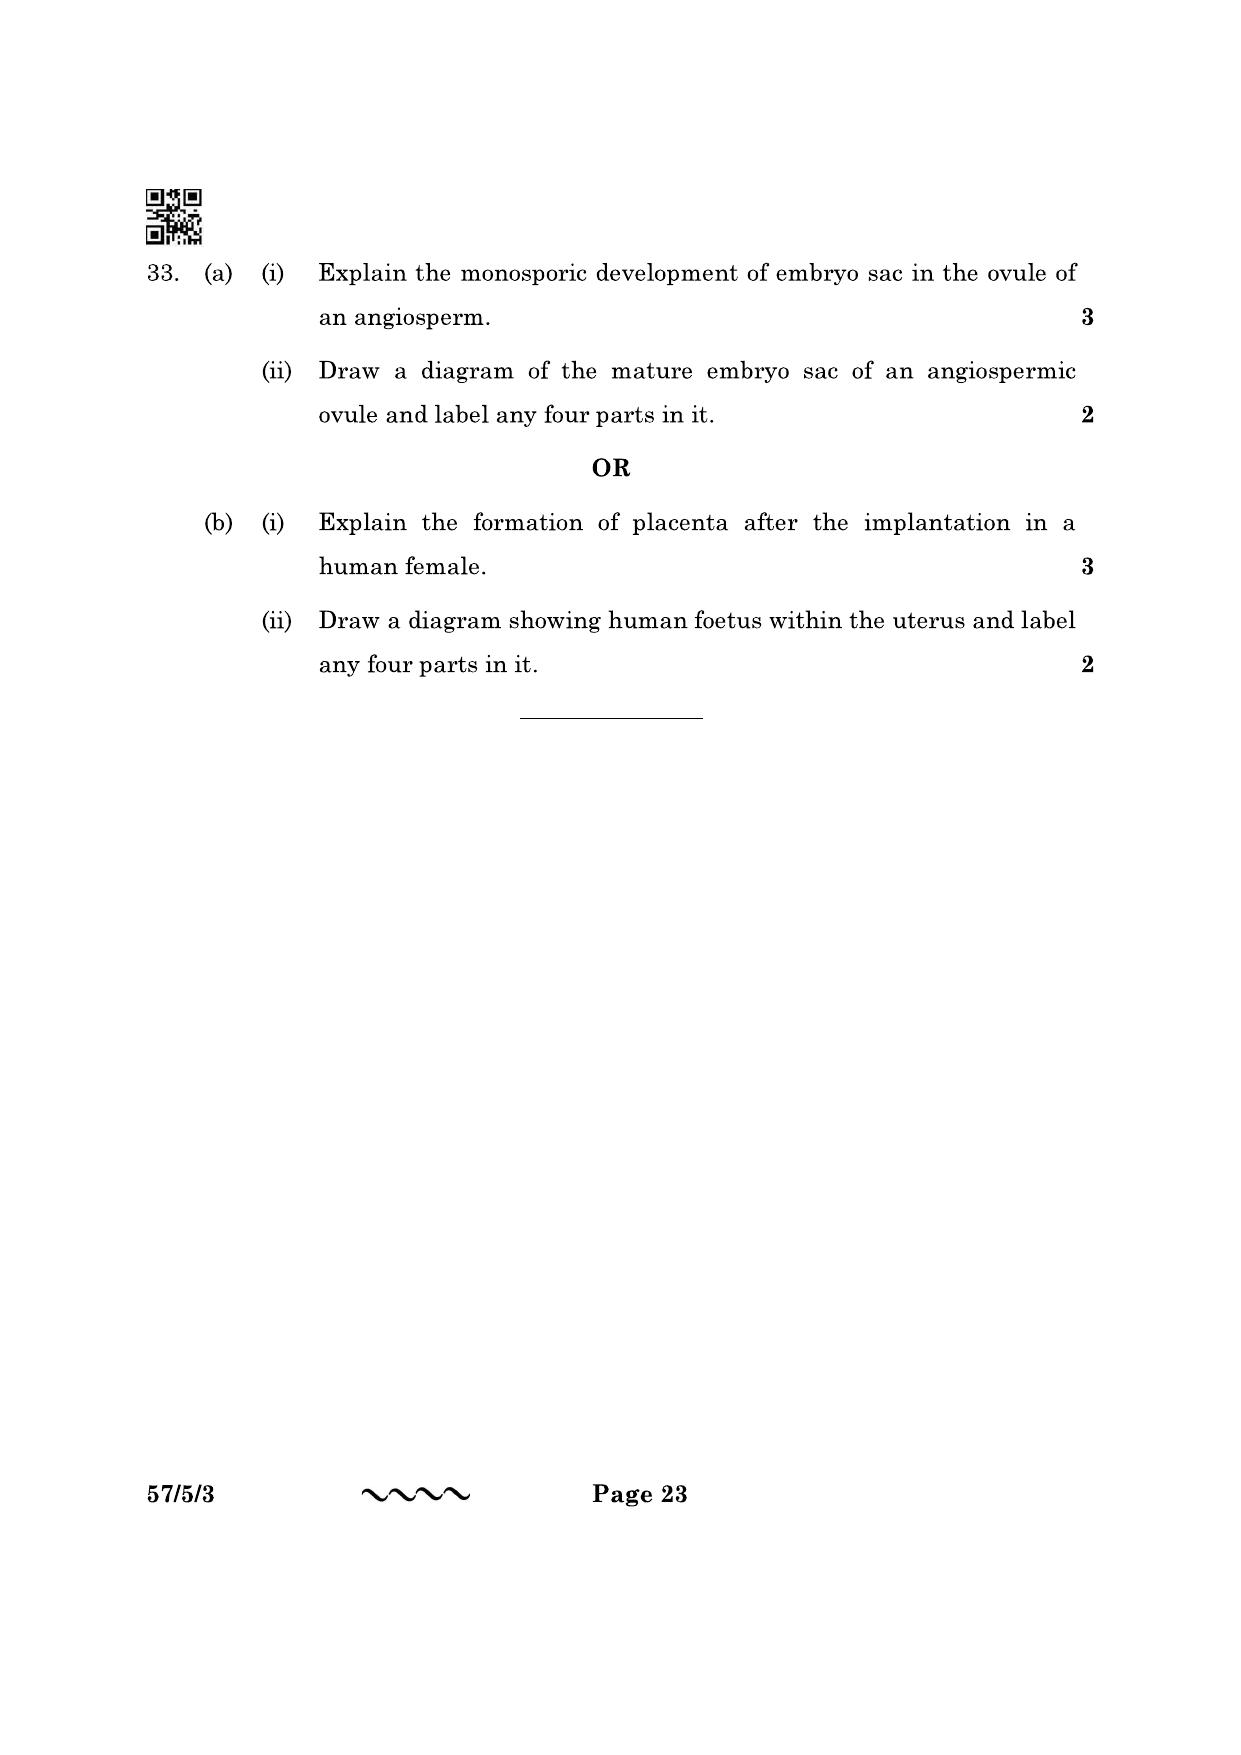 CBSE Class 12 57-5-3 Biology 2023 Question Paper - Page 23